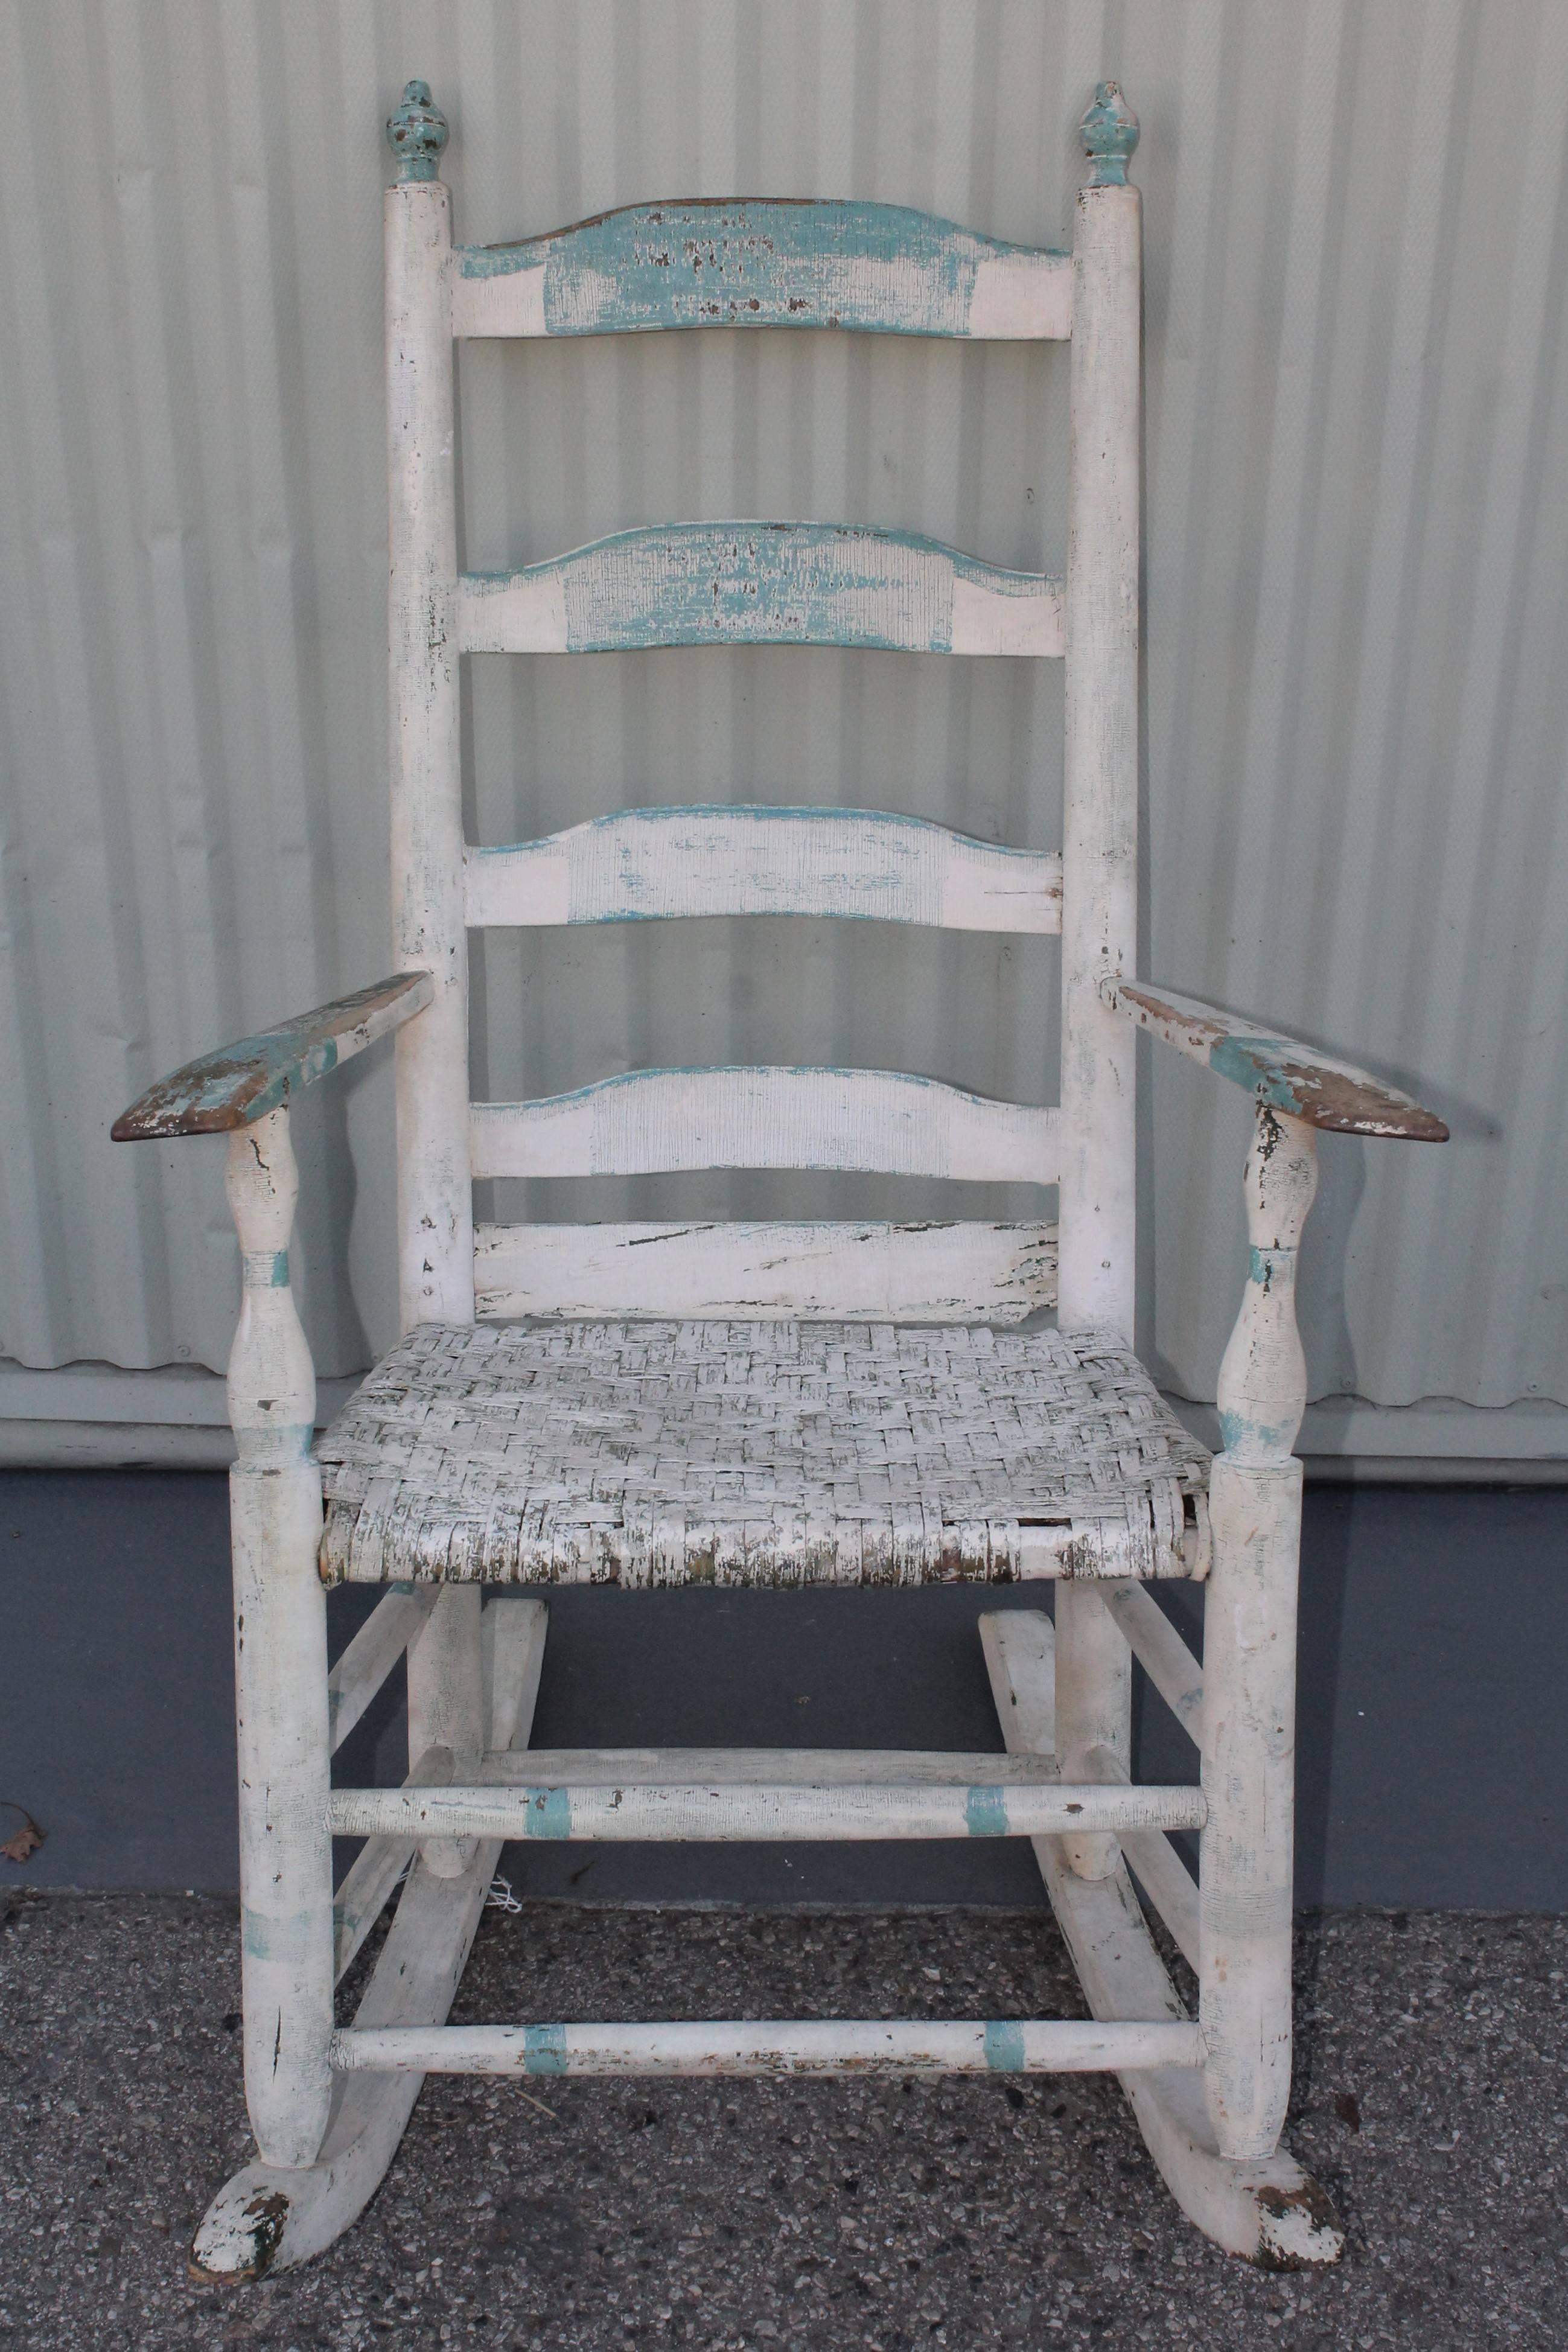 This fine example of Folk Art painted rocking chair. This handwoven splint seat is also original and in very good condition. This rocking chair was found in New England. Wonderful worn and aged patina.